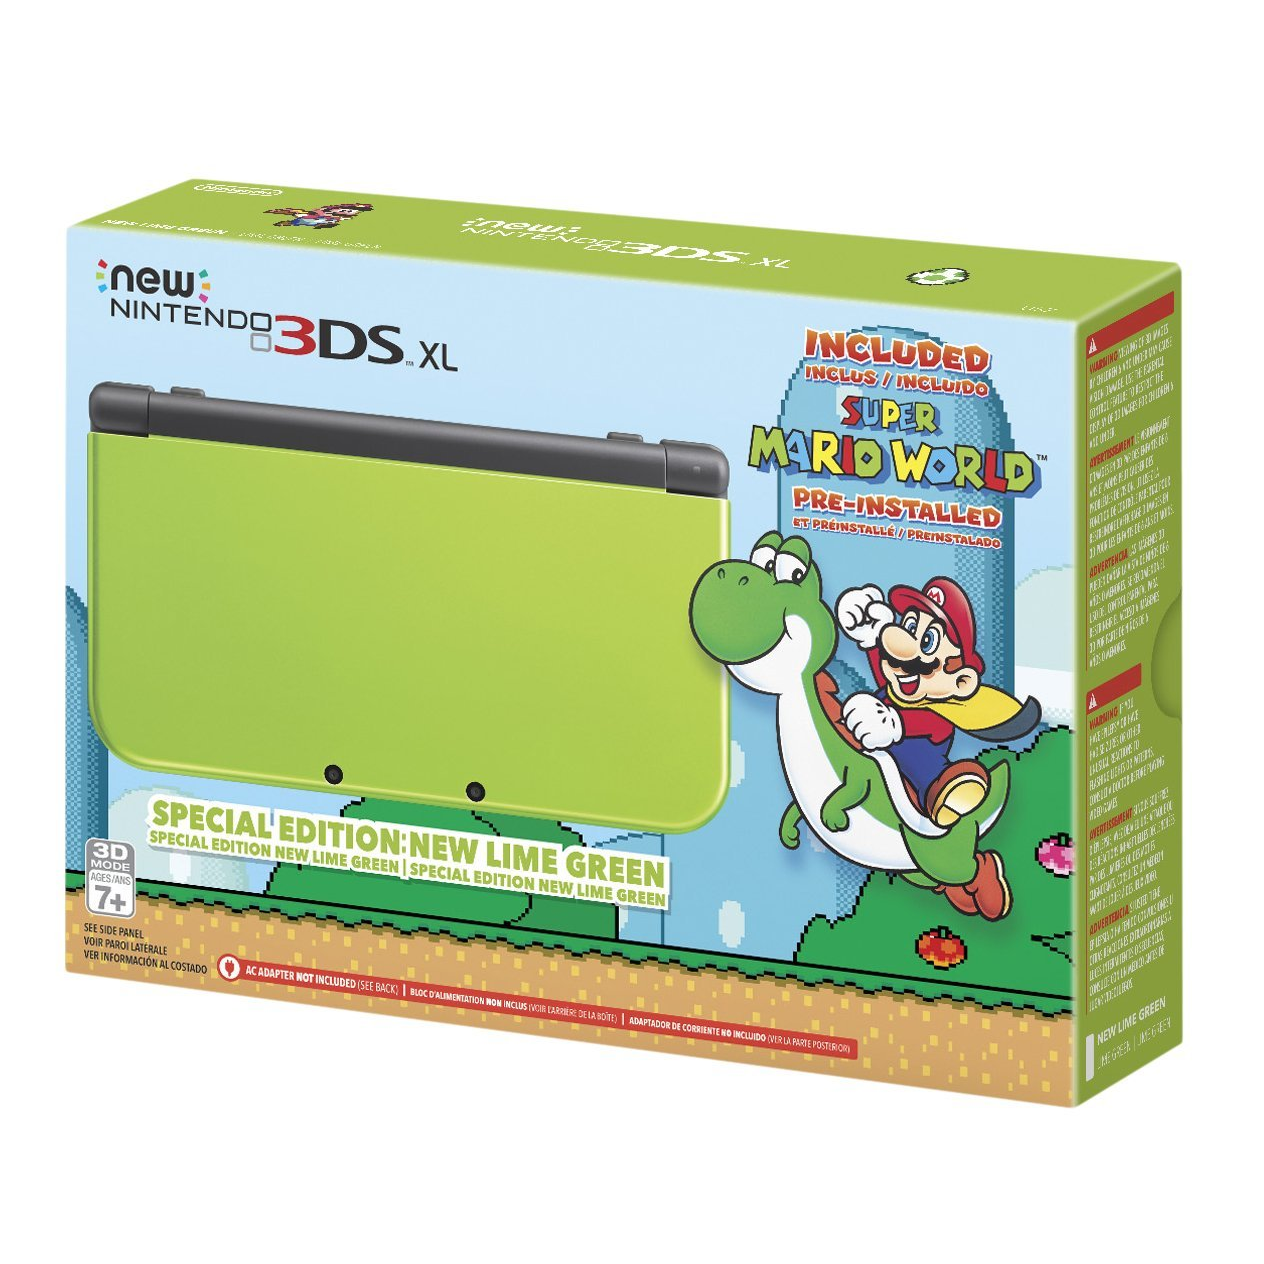 Nintendo New 3DS XL Special Edition: Lime Green (Amazon Exclusive) $199.00!